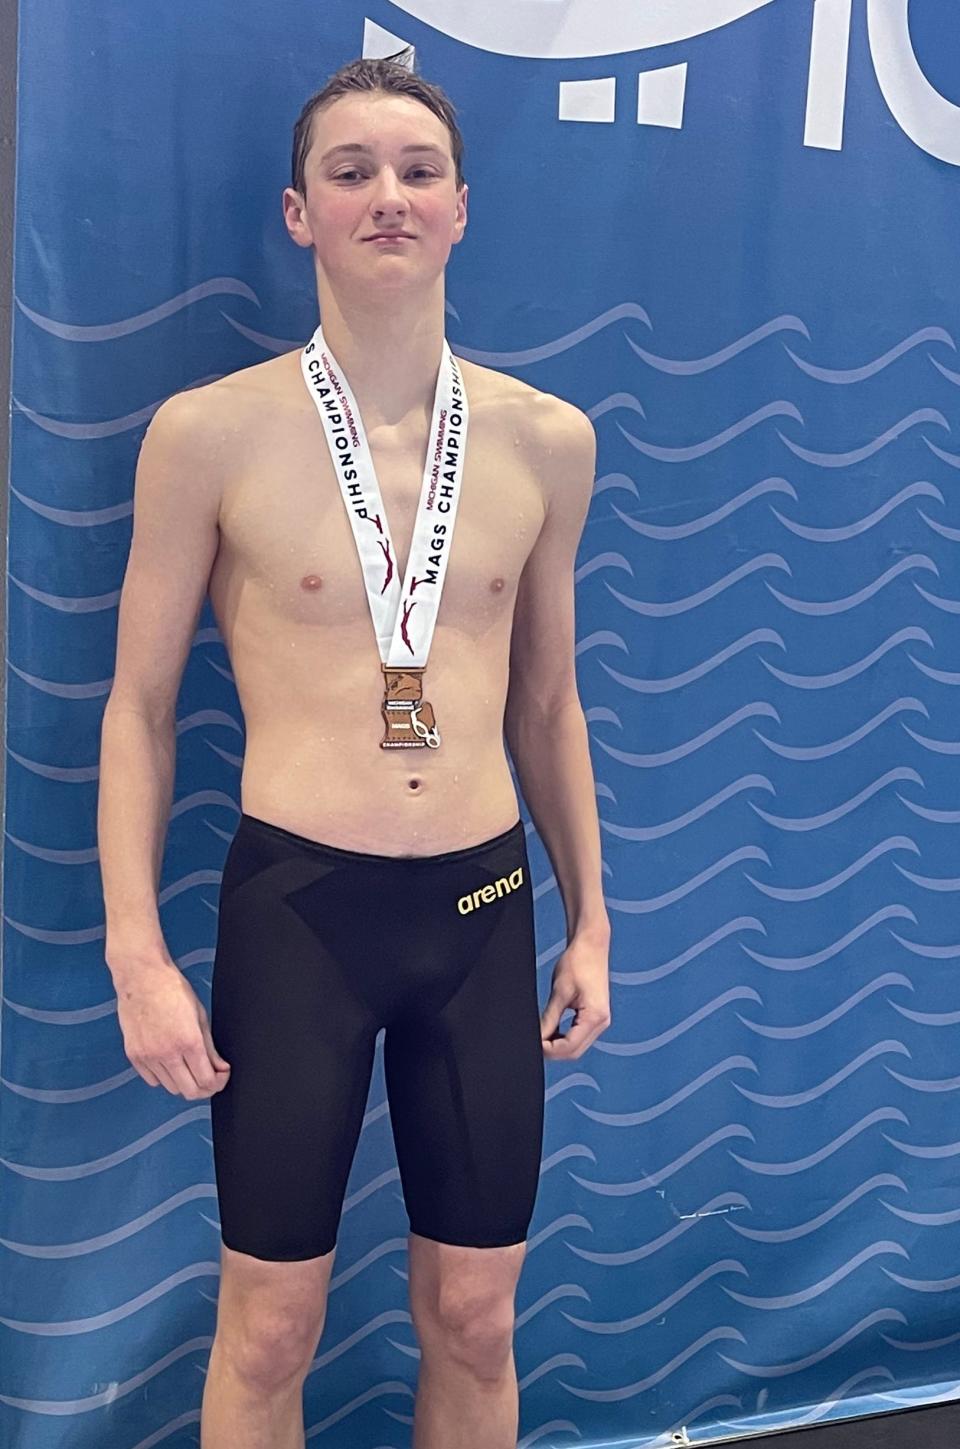 Owen Crook of Charlevoix and the Hammerhead Swim Club came through with a pair of team records and 28 total points in Holland.